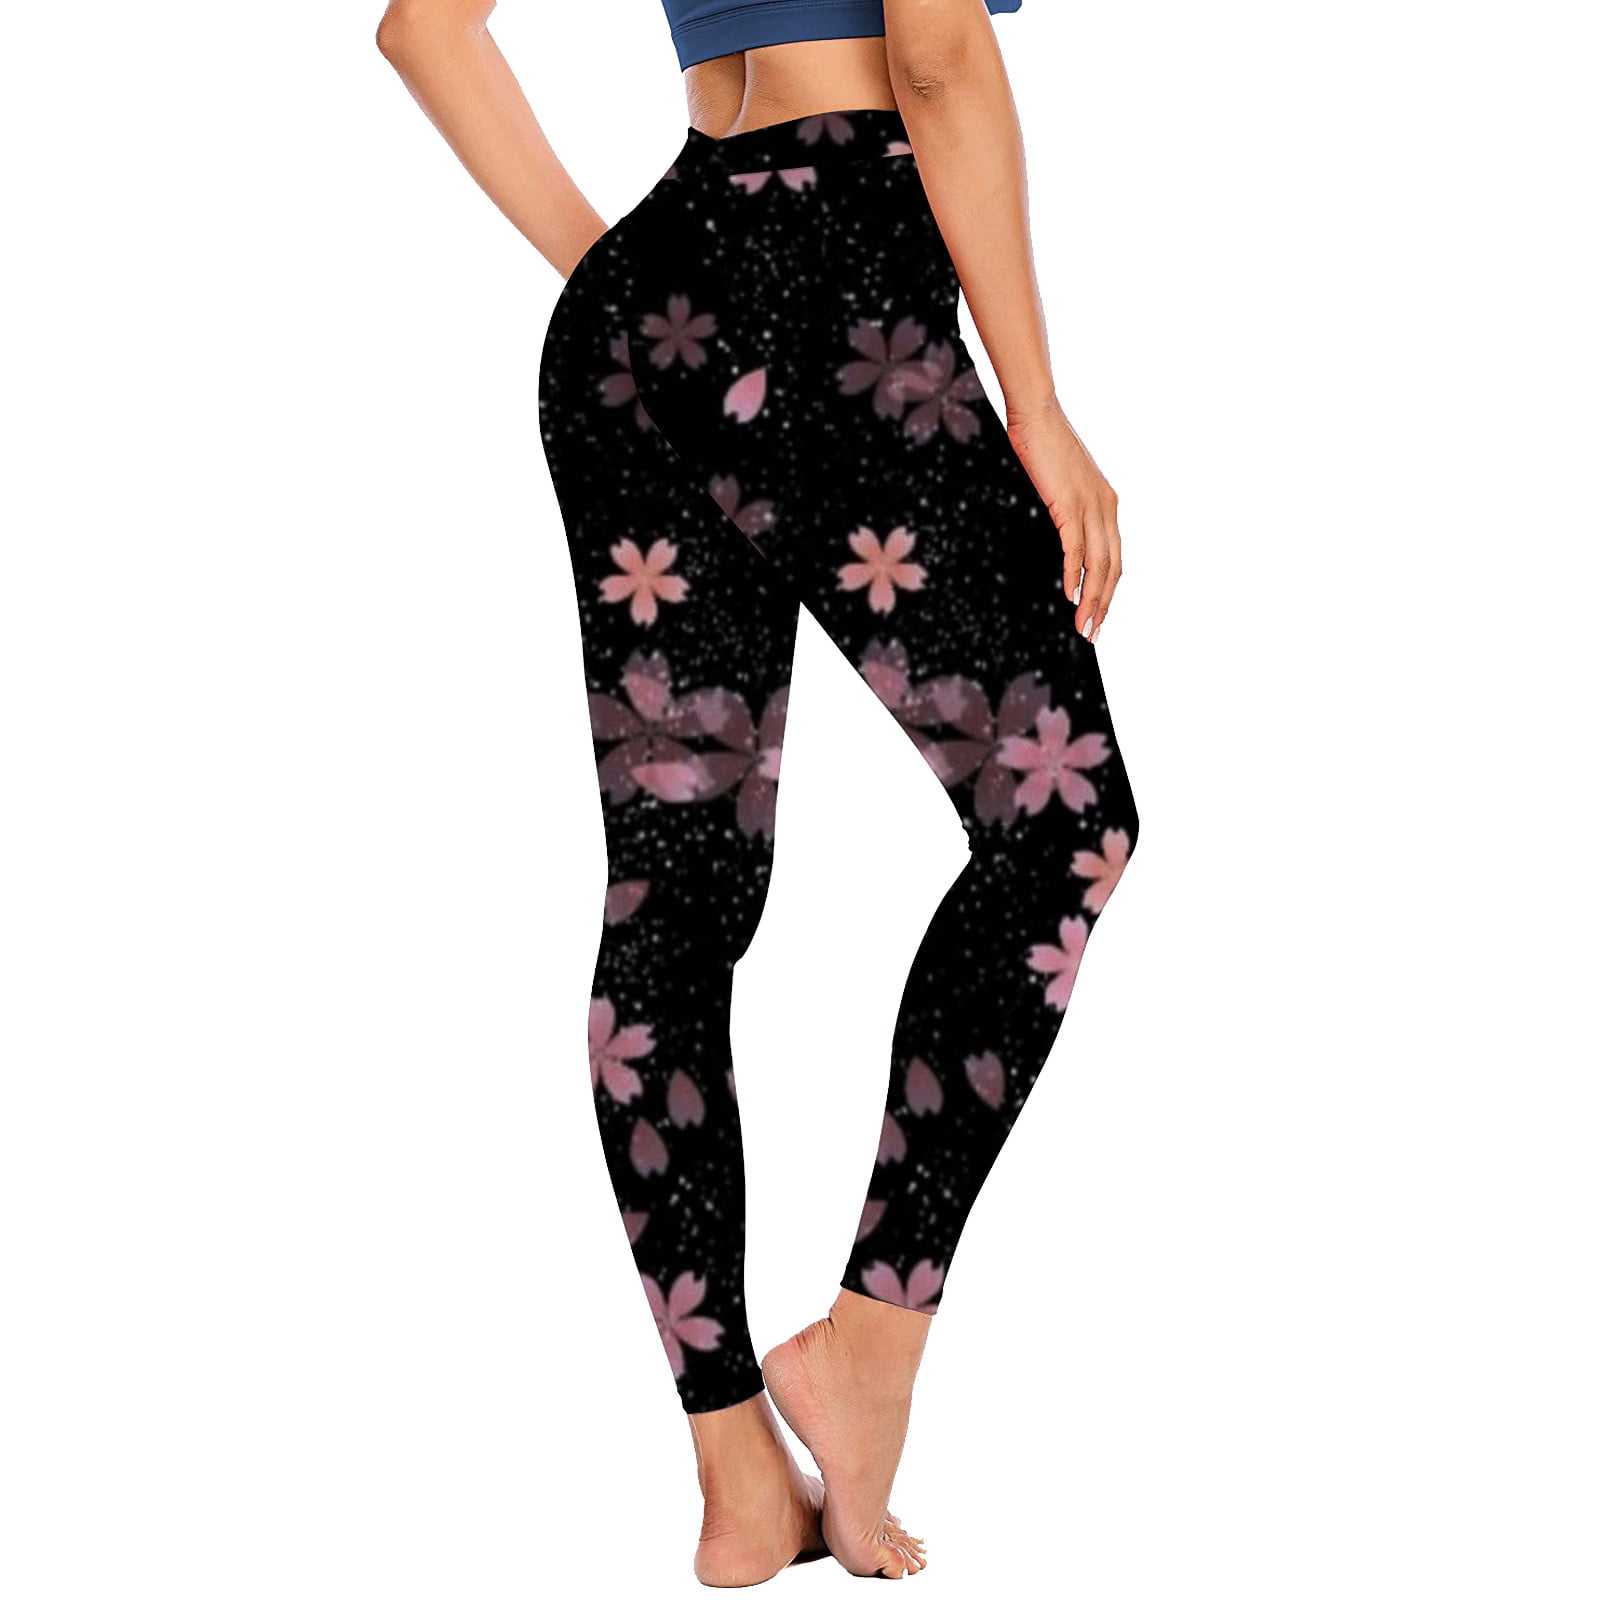 YYDGH High Waist Yoga Pants for Women with Pockets Floral Print Butt  Lifting Running Sports Workout Leggings Black L 